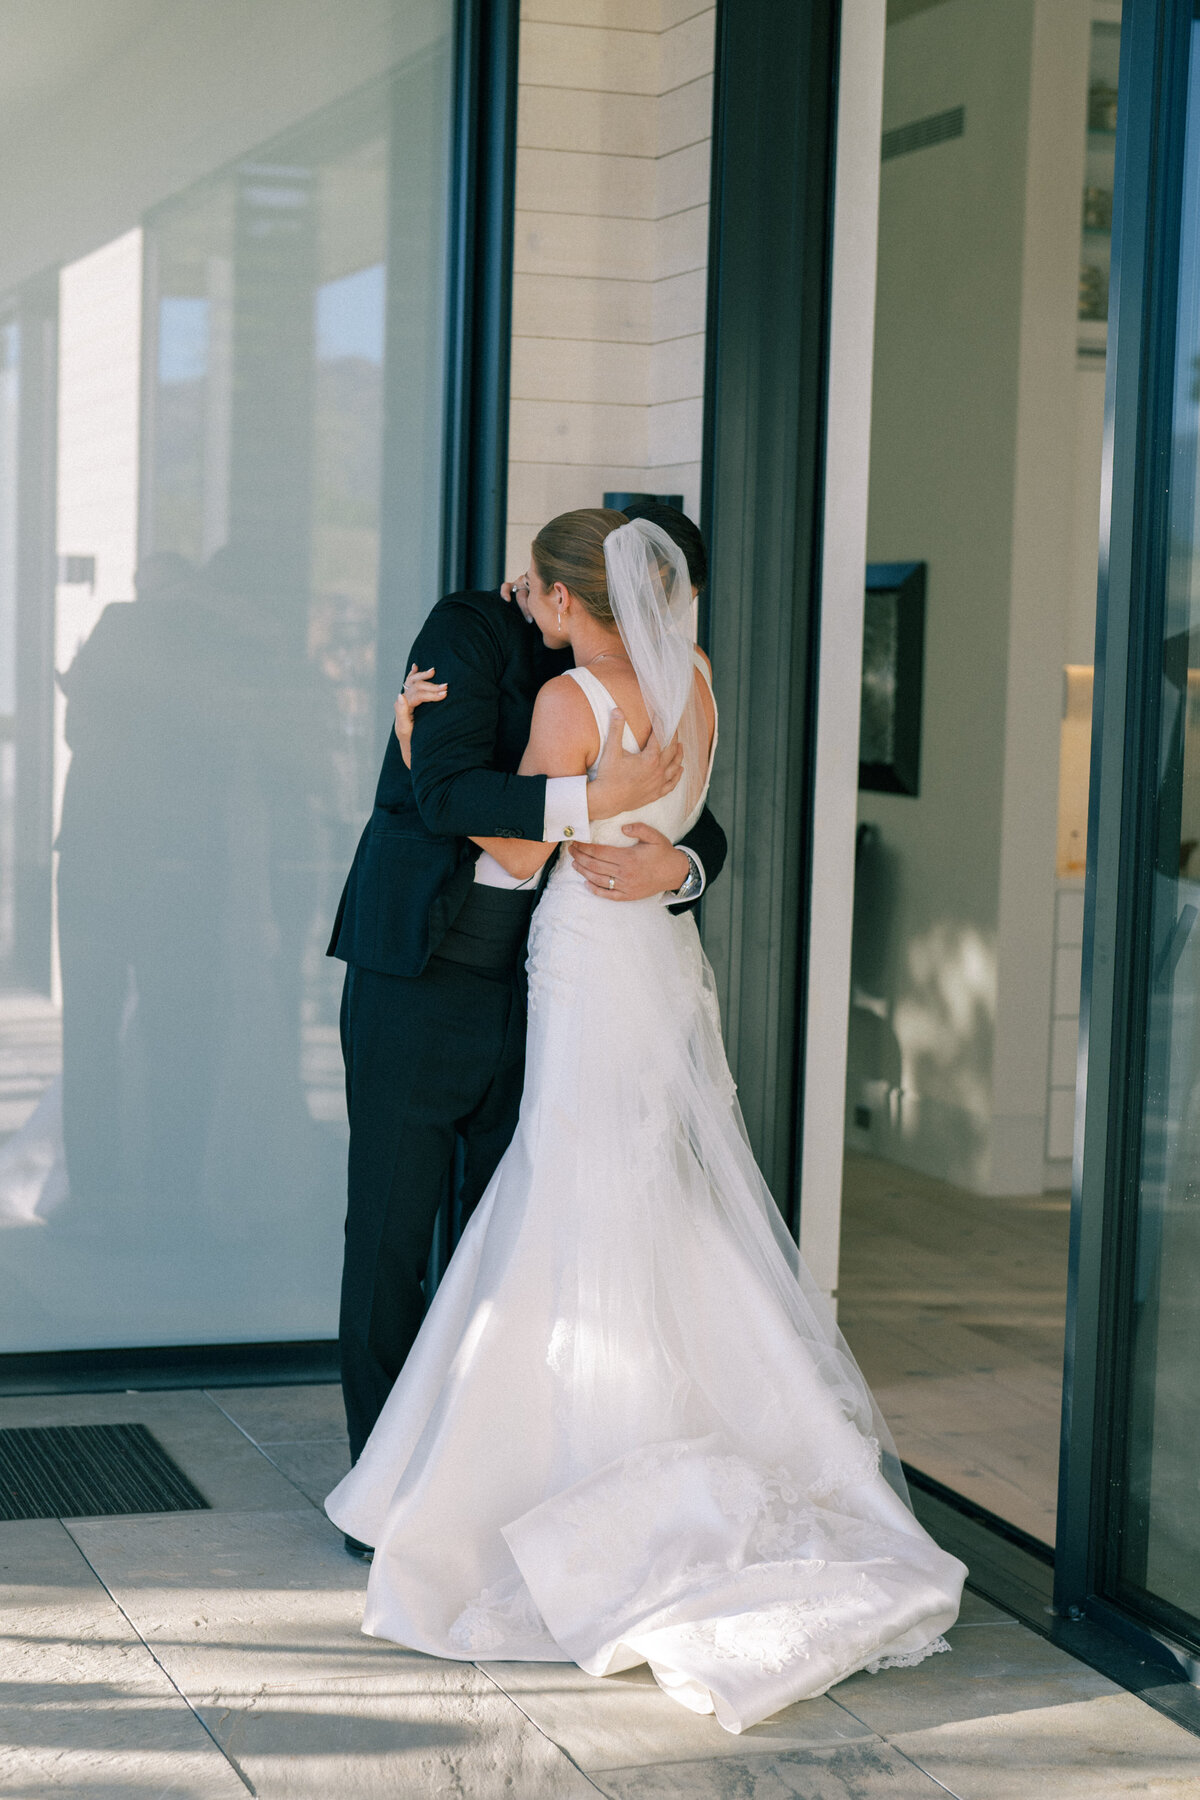 Bride and groom embrace after ceremony